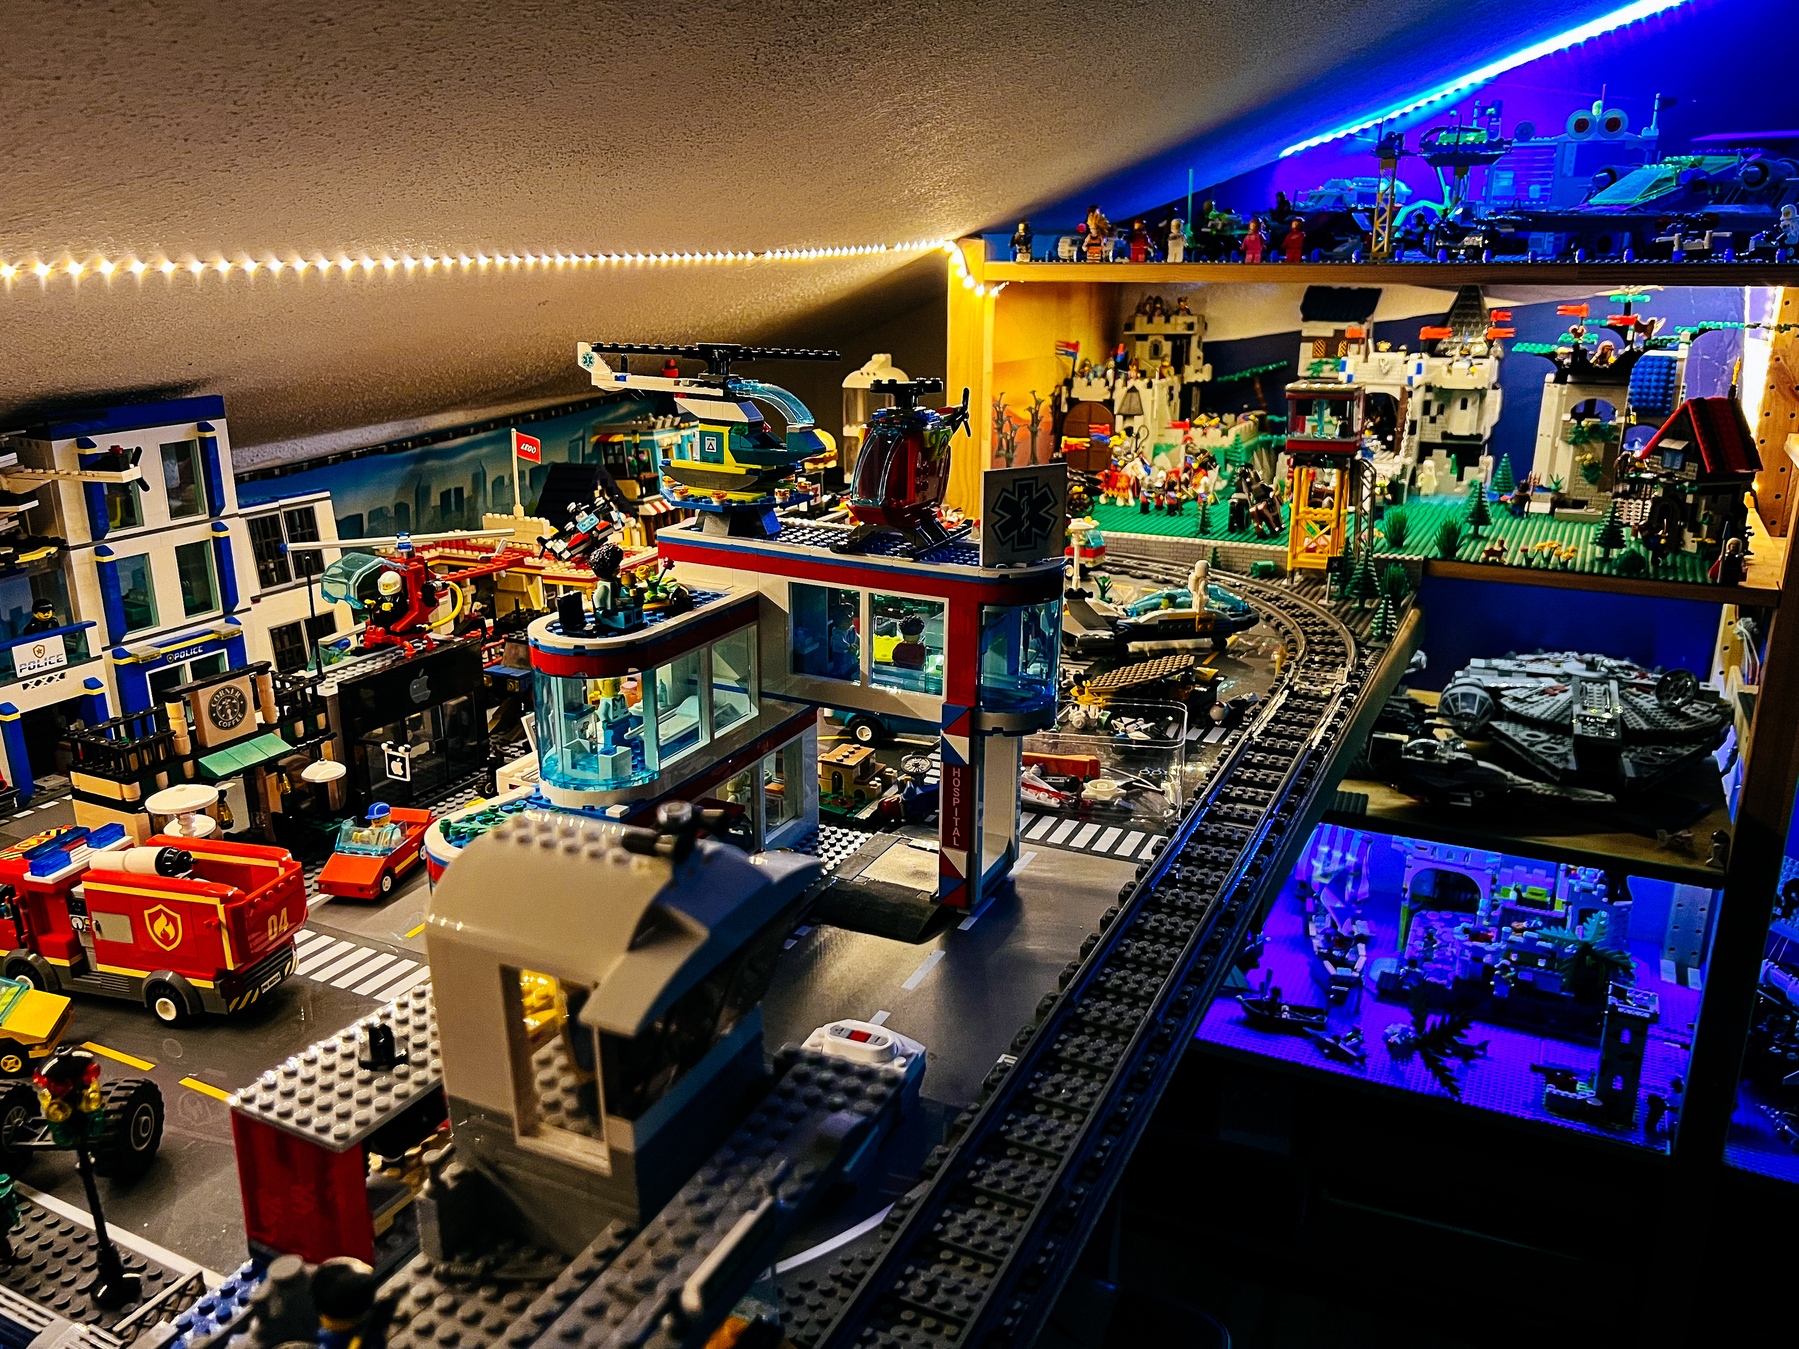 A detailed LEGO display featuring an urban cityscape with buildings, a fire station, vehicles, rail tracks, and a backdrop of a Star Wars Millennium Falcon model and a festive holiday scene. Bright LED lights illuminate the setup.